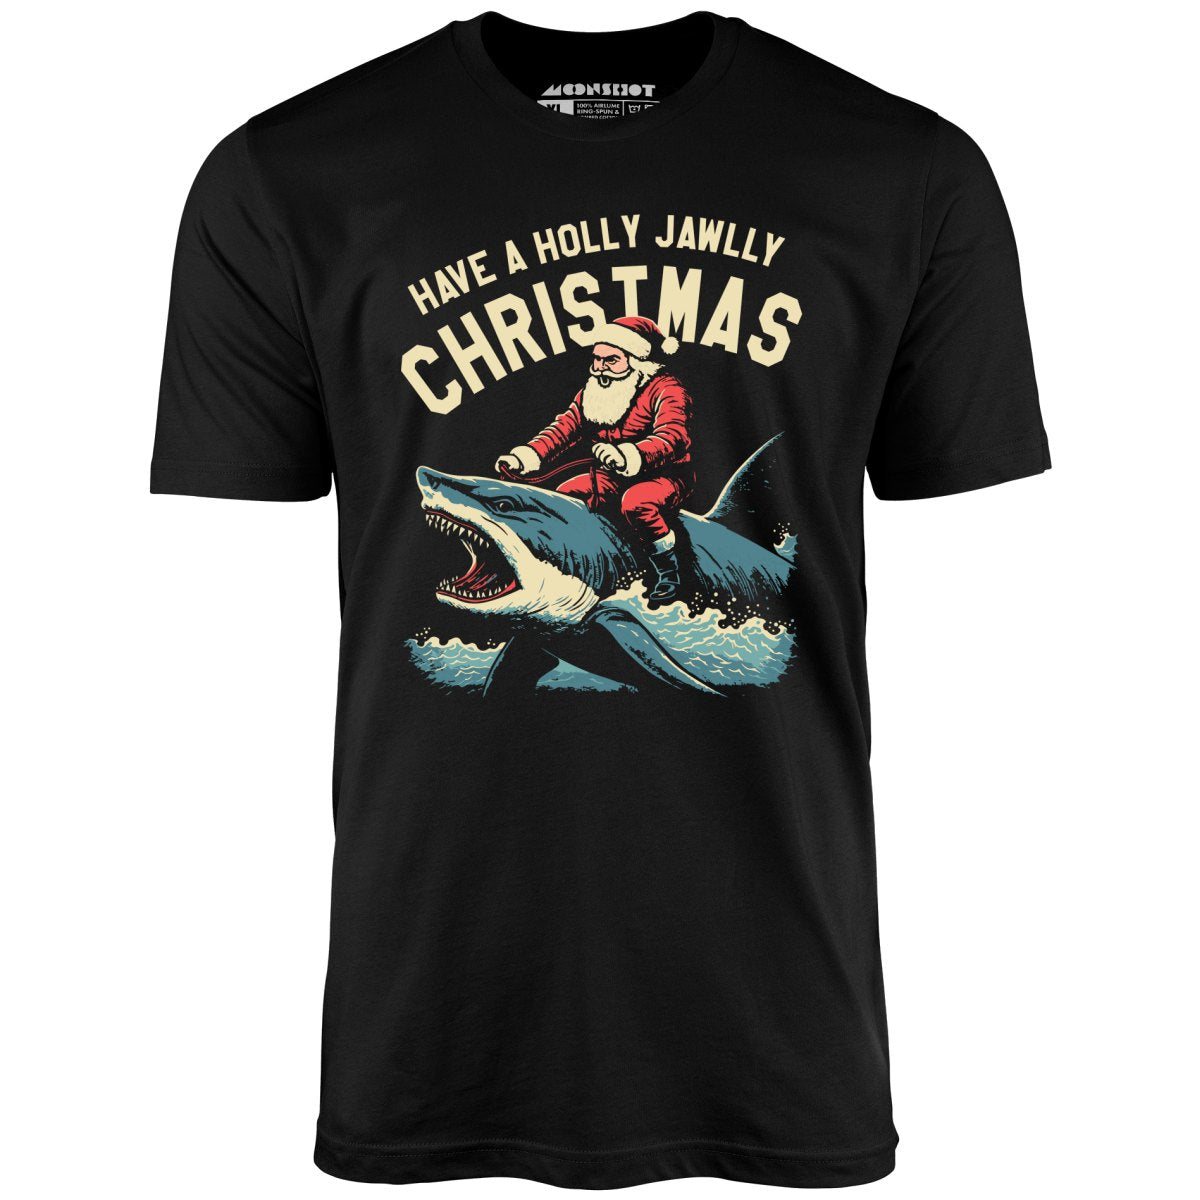 Have a Holly Jawlly Christmas - Unisex T-Shirt